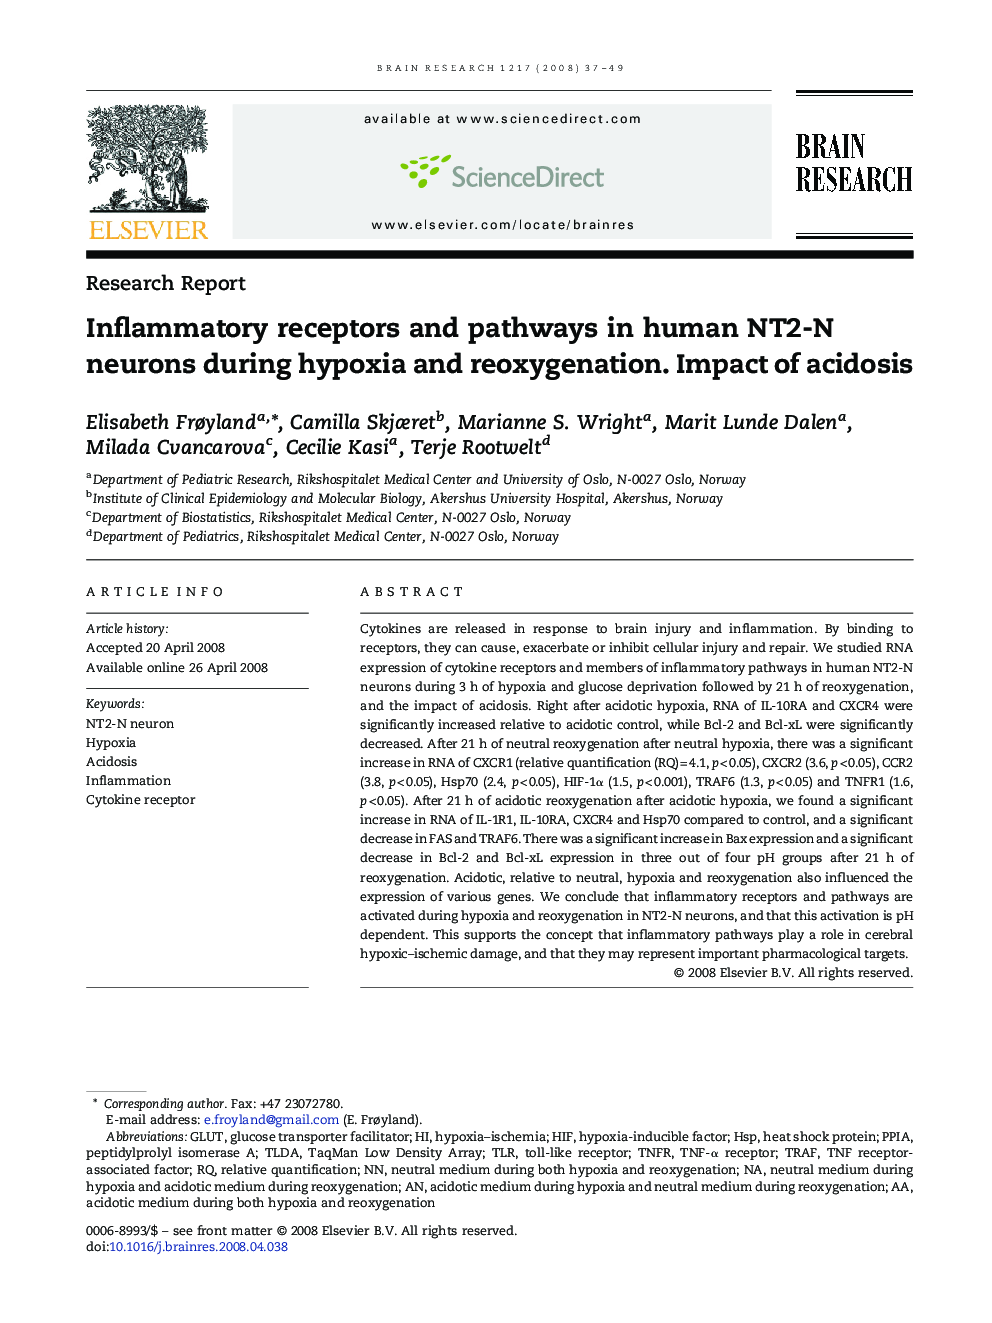 Inflammatory receptors and pathways in human NT2-N neurons during hypoxia and reoxygenation. Impact of acidosis